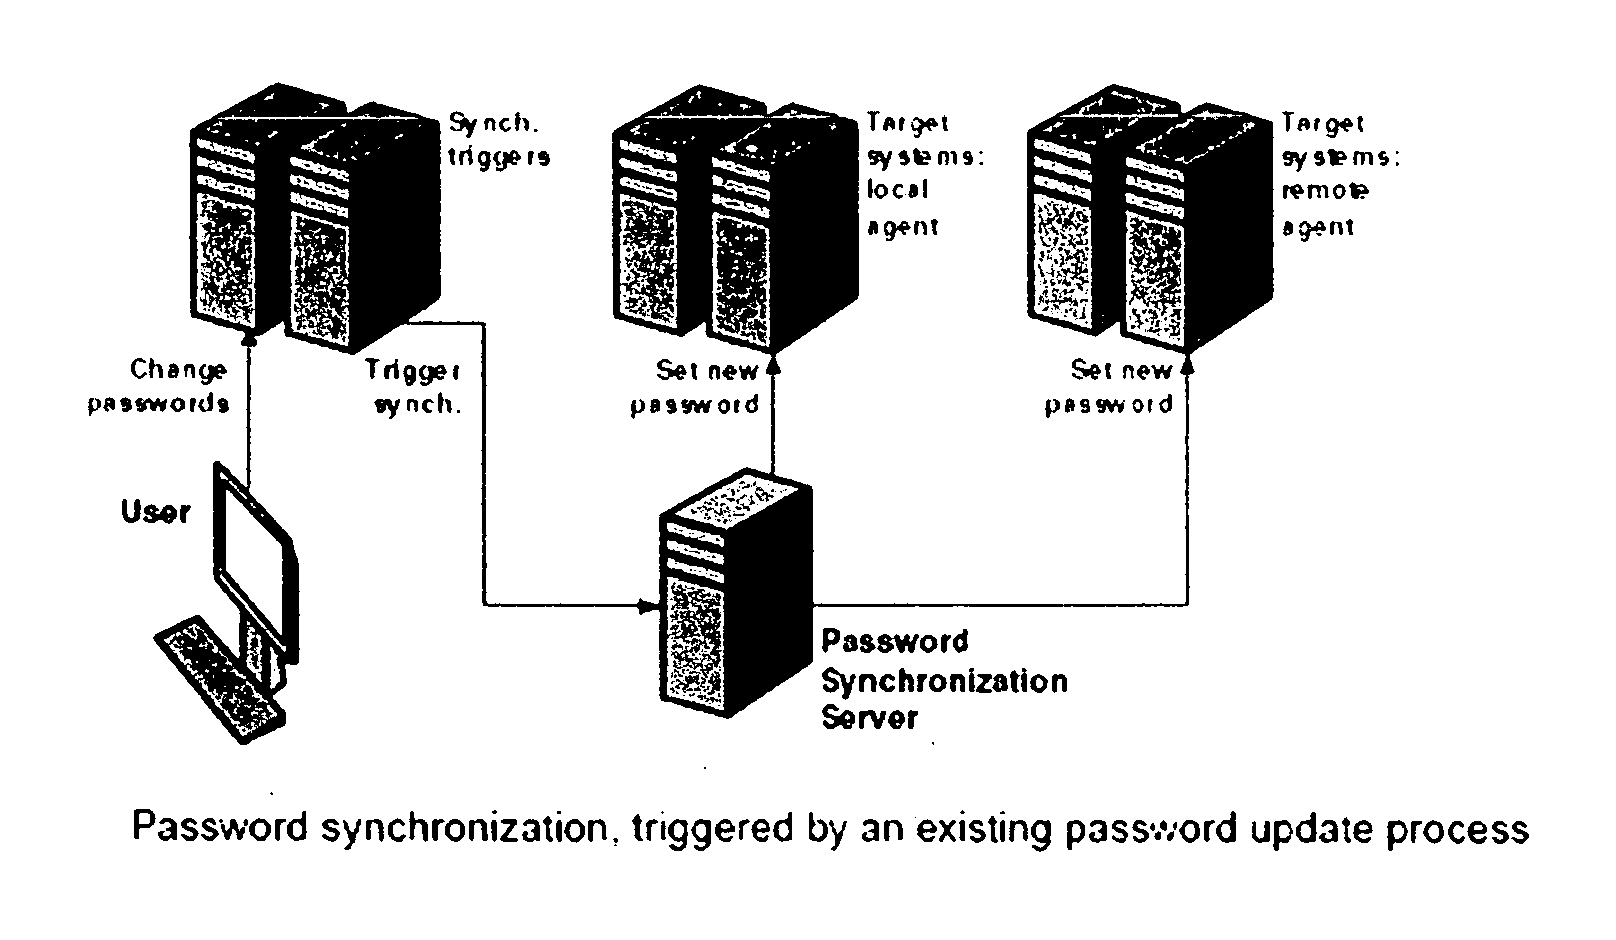 Method for reduced signon, using password synchronization instead of a credential database and scripts